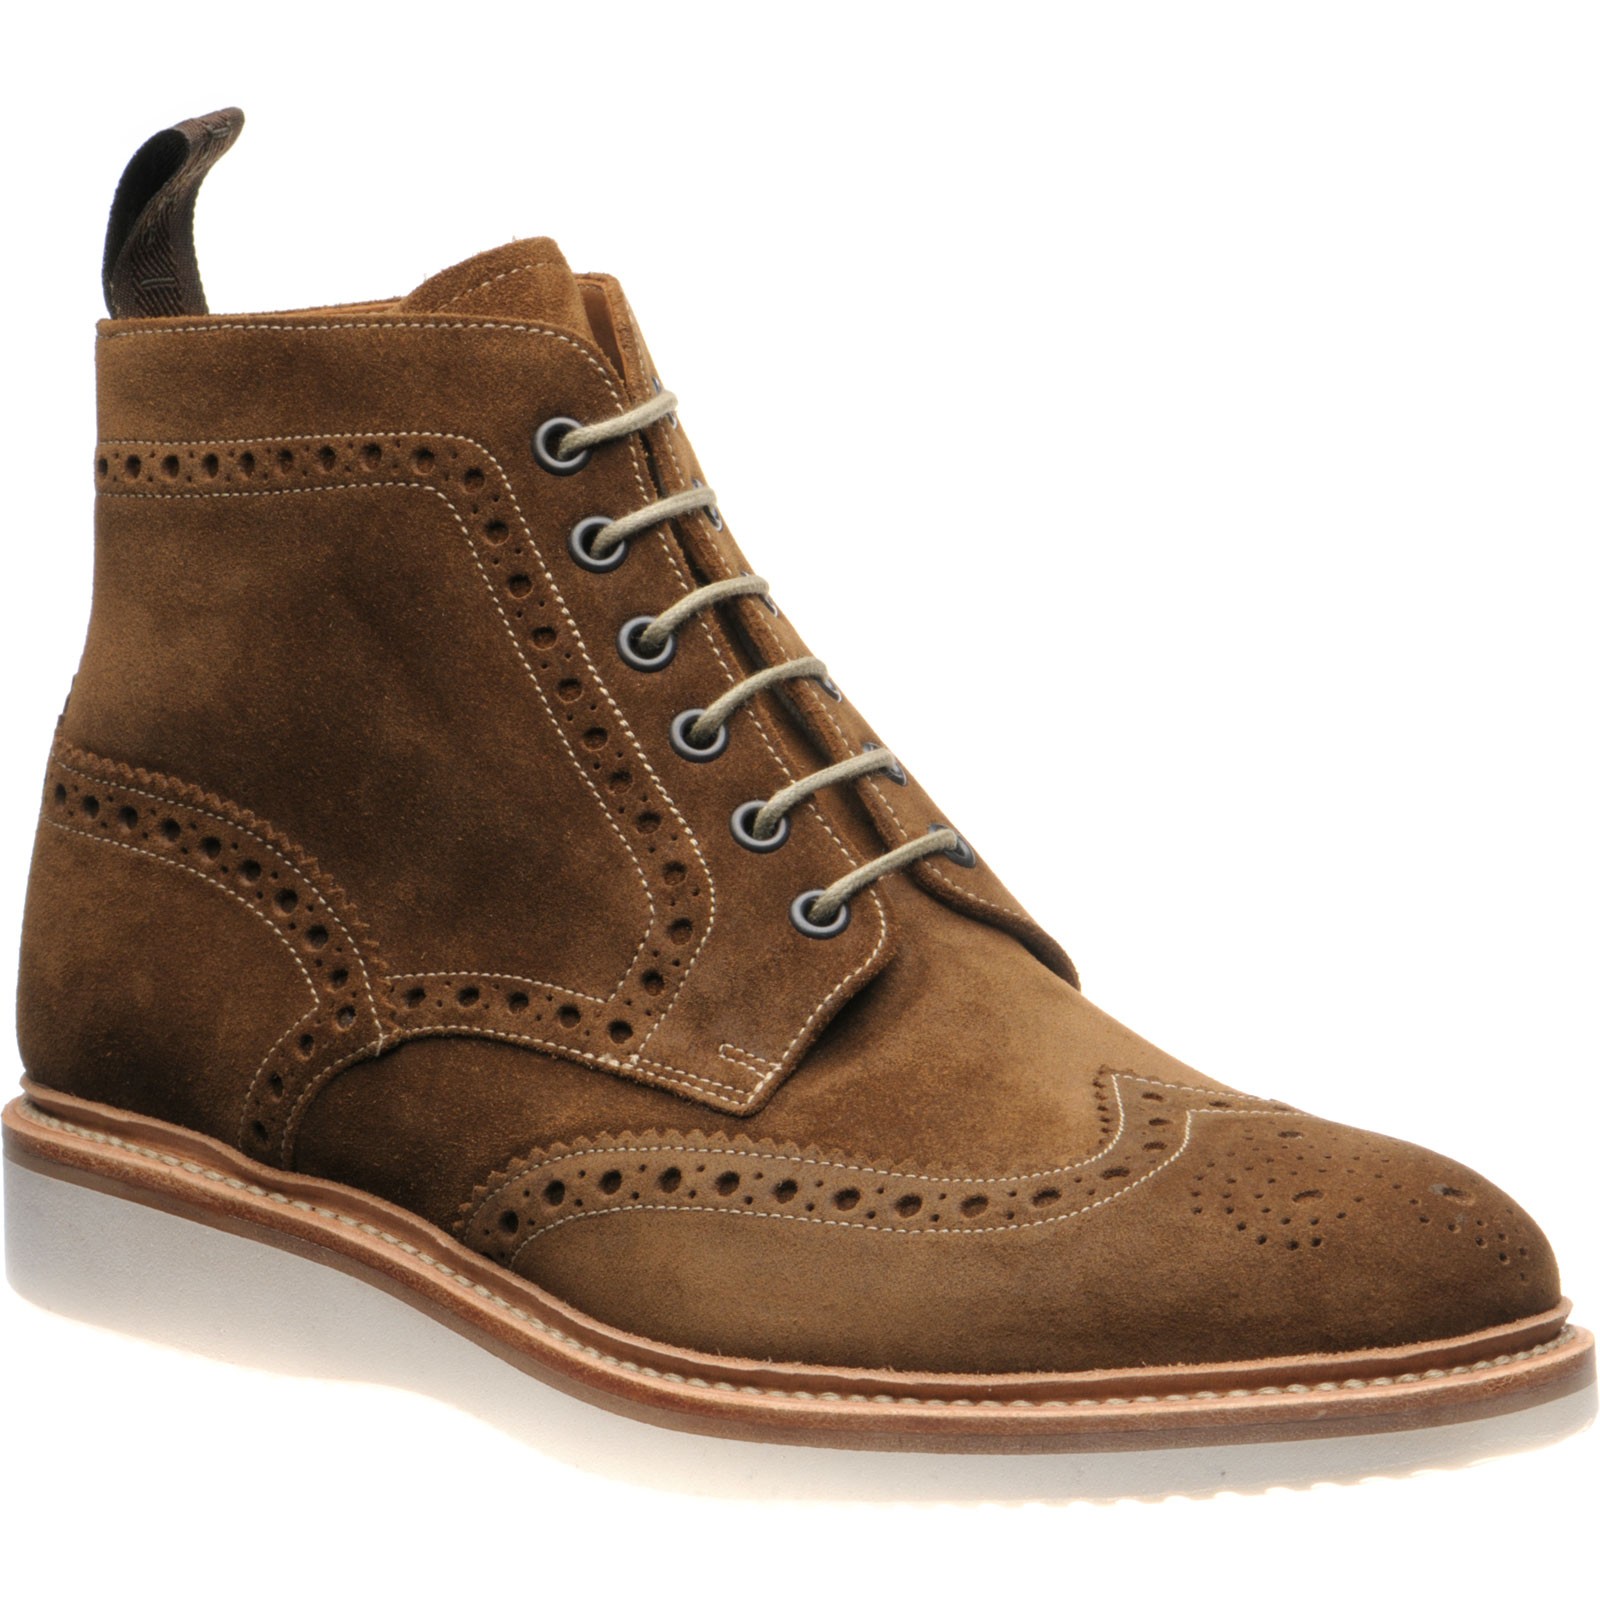 Loake shoes | Loake Design | Mamba rubber-soled brogue boots in Tan ...